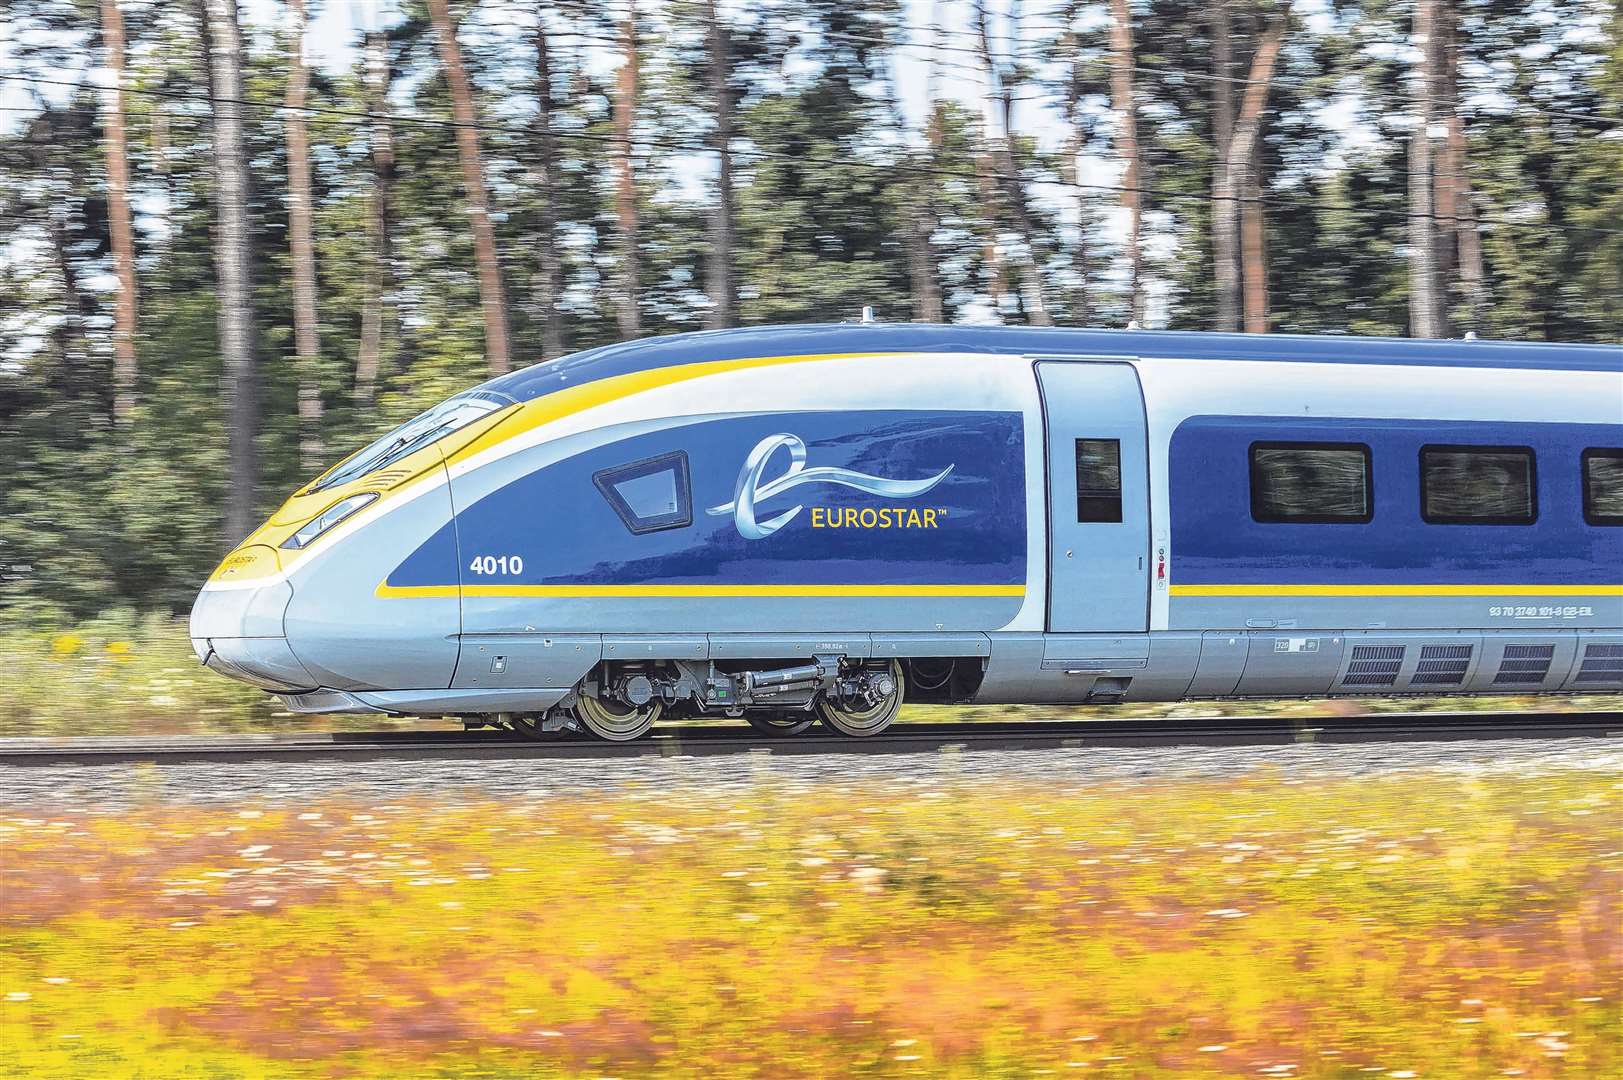 Eurostar has seen passenger numbers fall 95% as a result of the pandemic